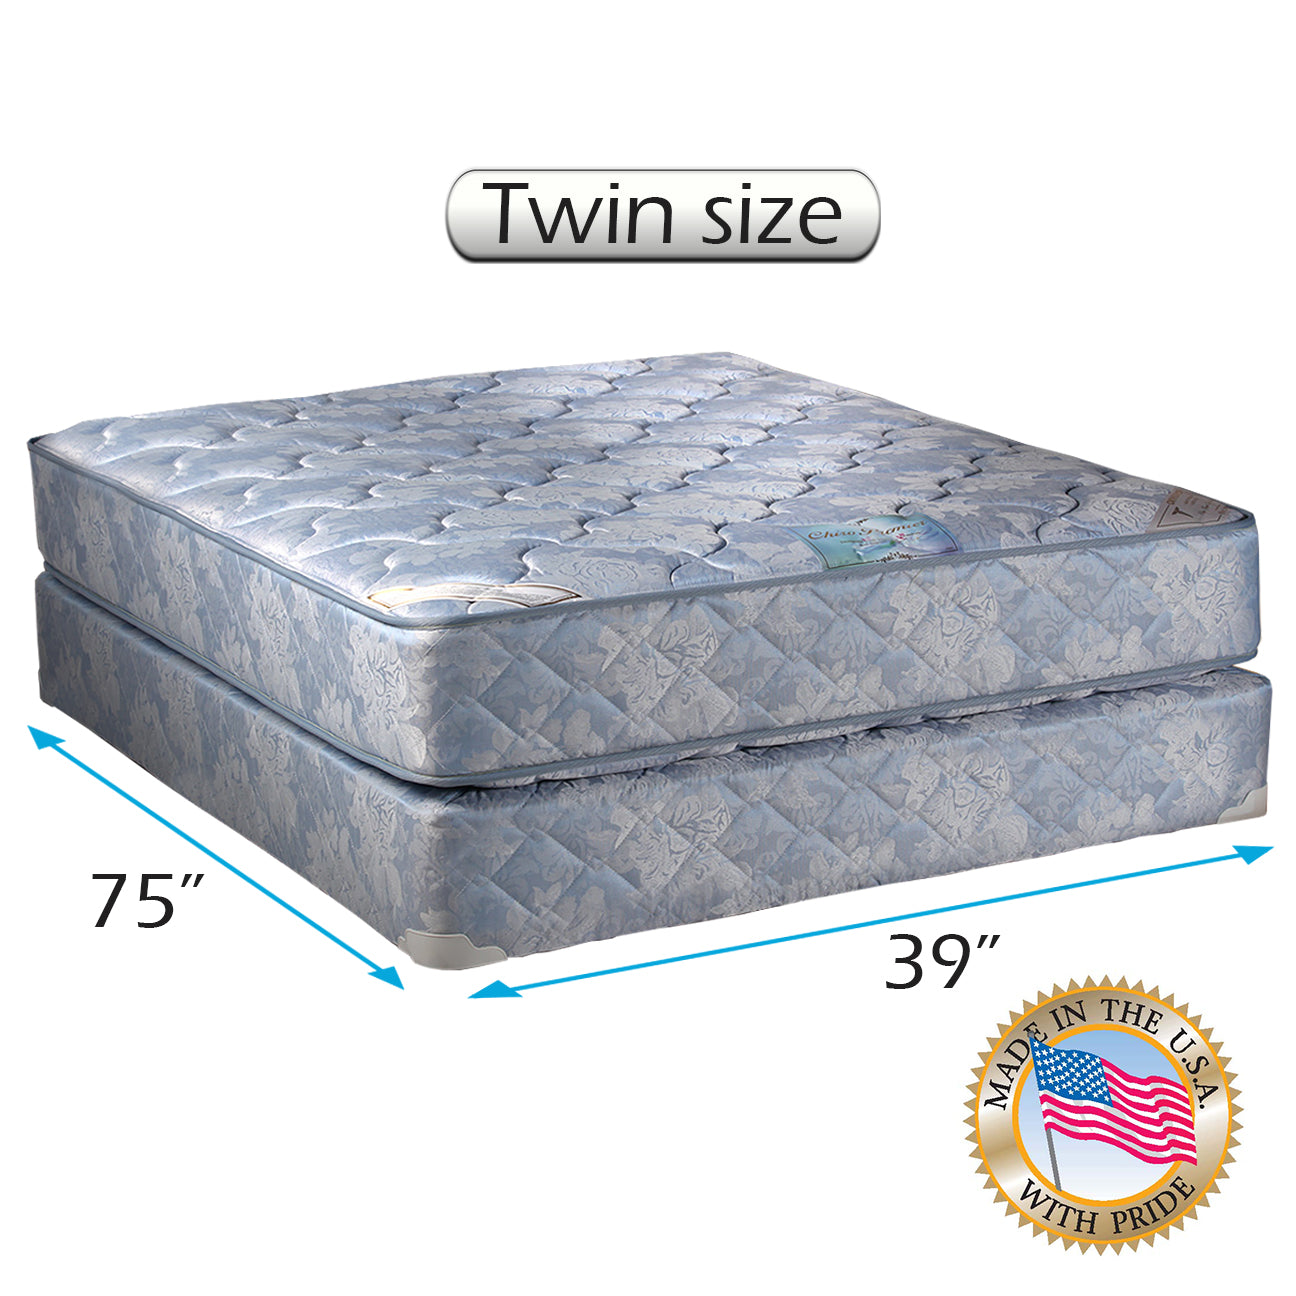 Chiro Premier Orthopedic Gentle Firm (Blue Color) Twin Size Mattress and Box Spring Set - Fully Assembled, Good for Your Back, Long Lasting and 2 Sided